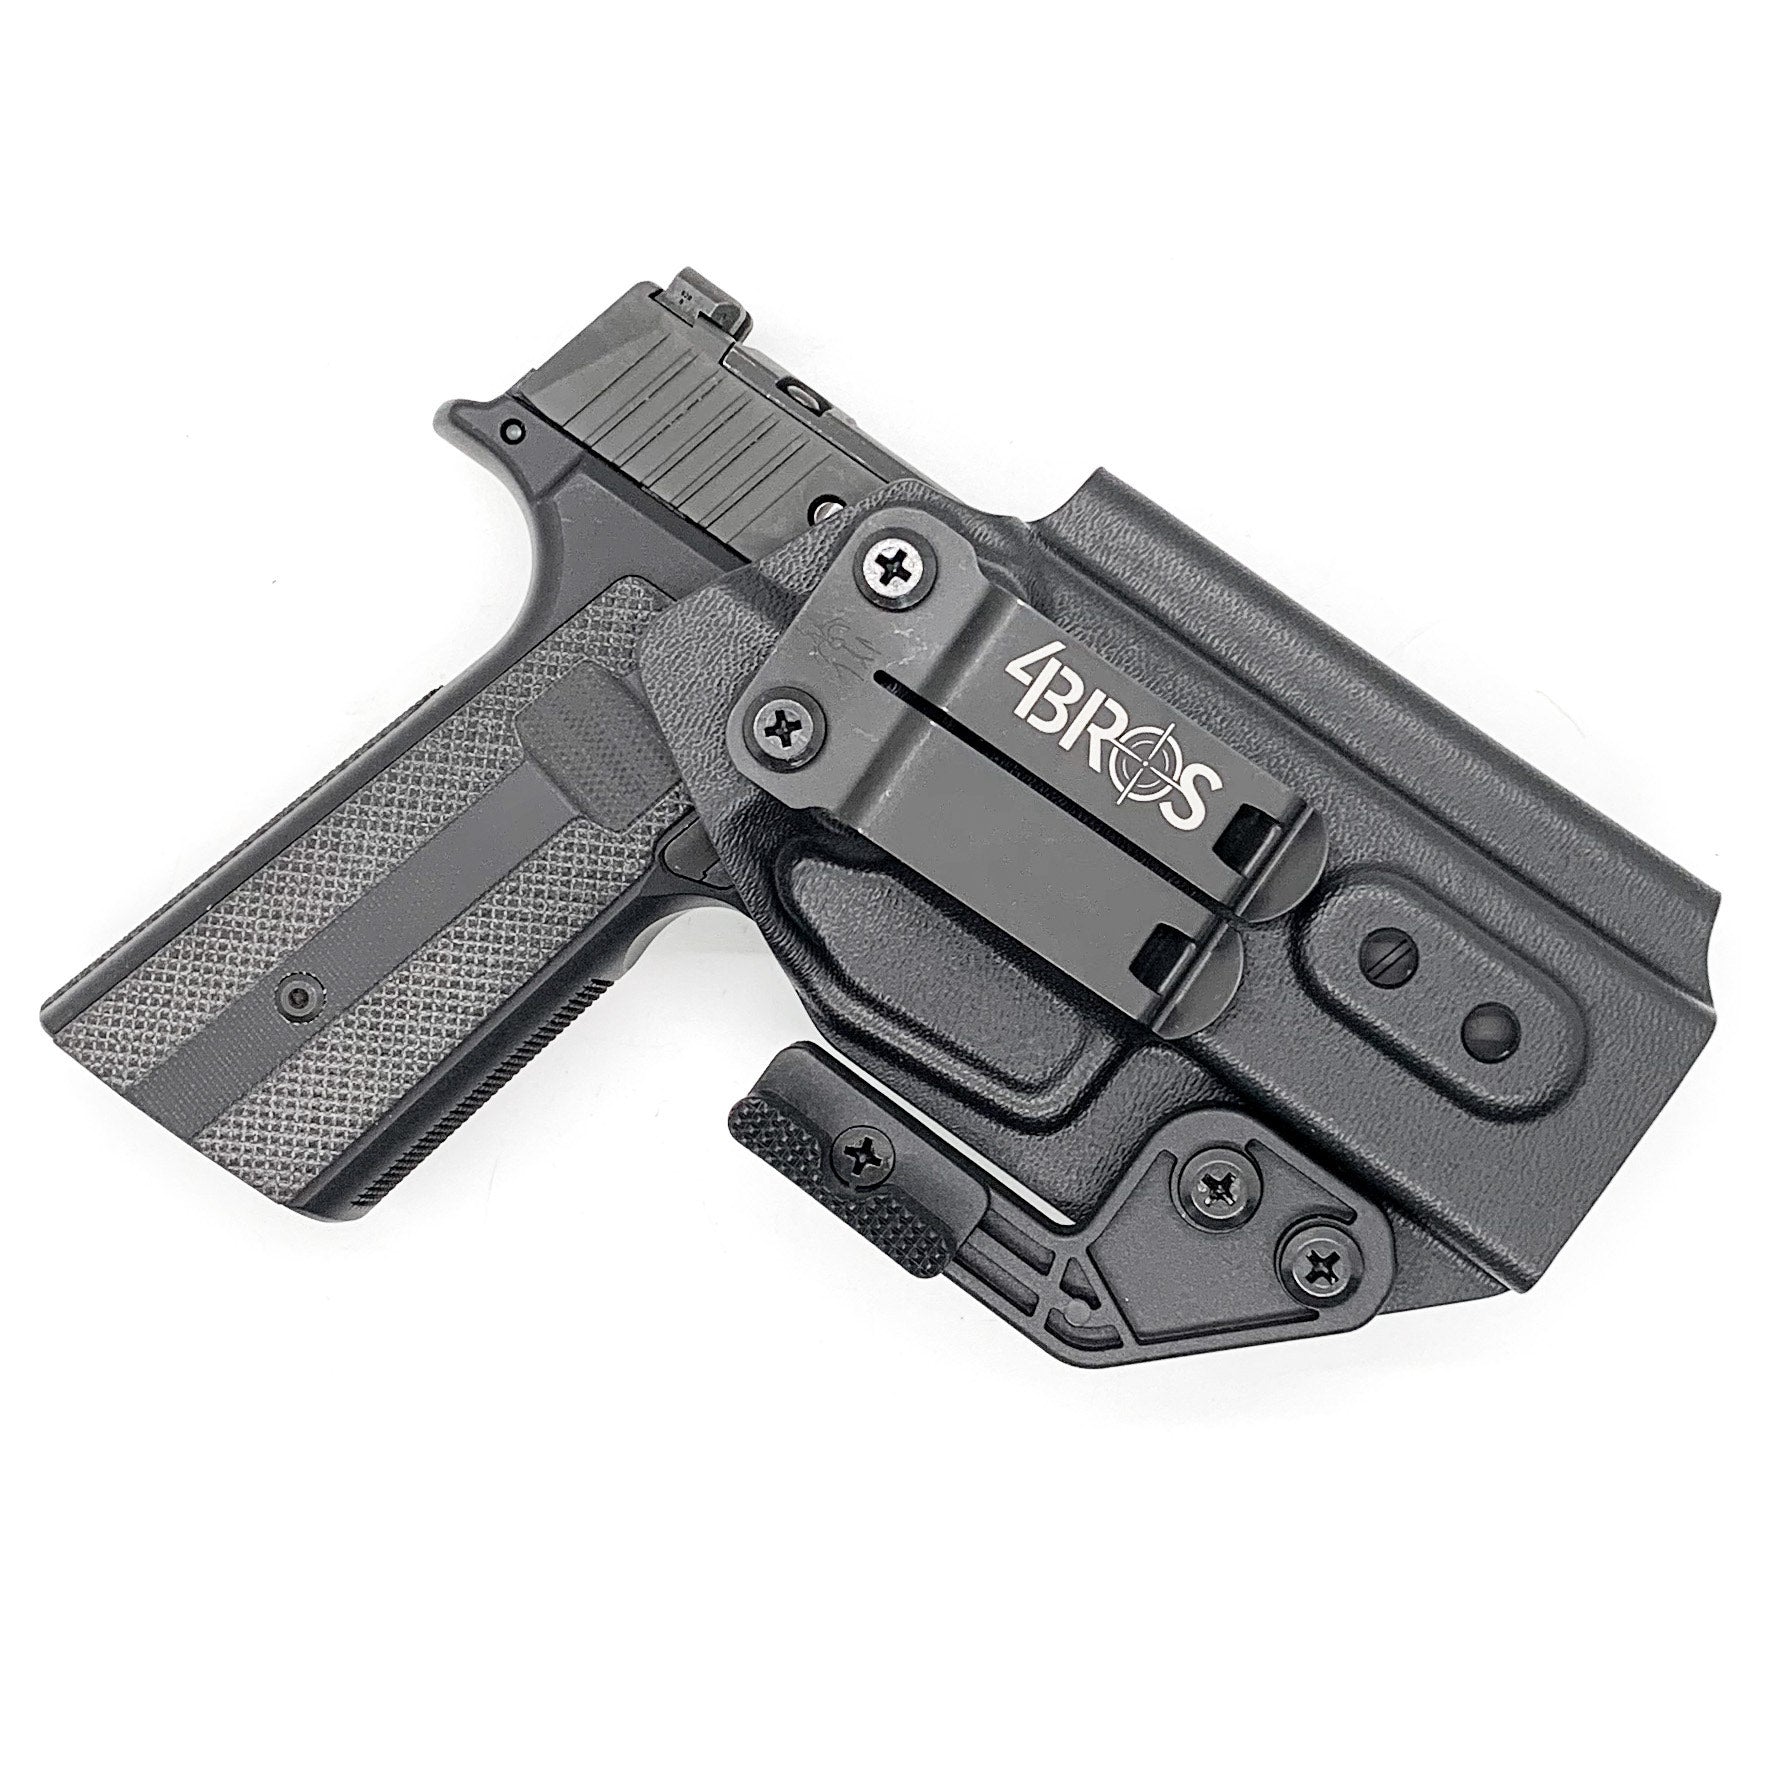 For the best concealed IWB AIWB Inside Waistband Holster designed to fit the Sig Sauer P365-XMACRO, P365, and P365XL with the Mischief Machine Alpha, Omega, & Commander Grip Module, shop Four Brothers Holsters. Adjustable retention, high sweat guard, minimal material for comfort and concealment. Made in the USA